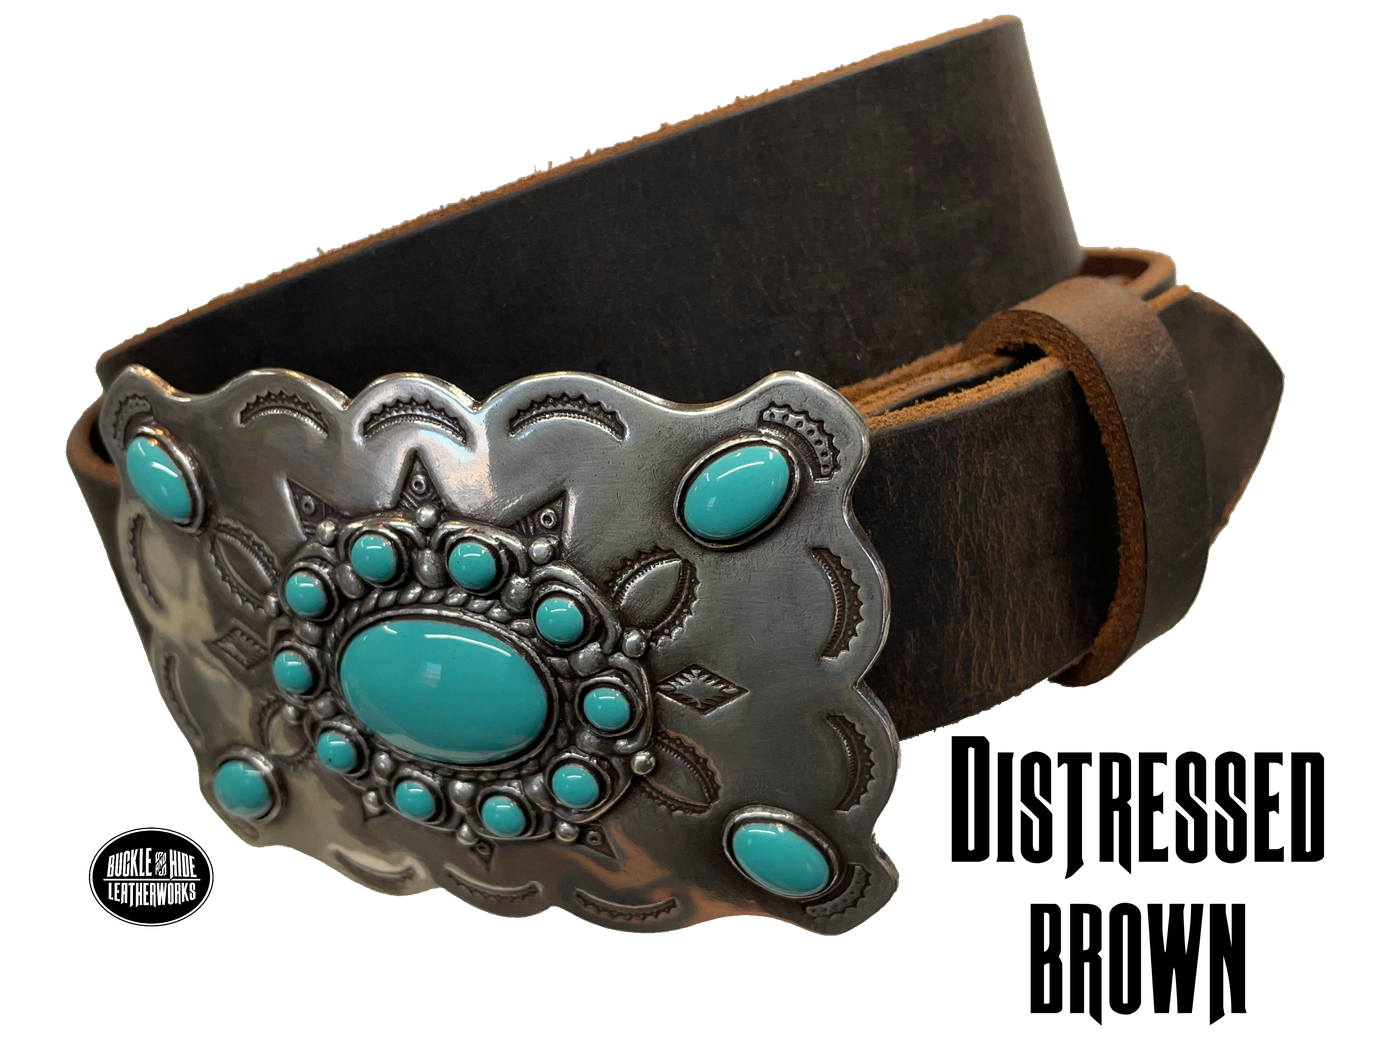 Southwestern style belt buckle with Southwestern tooling, scalloped design around edges, and simulated turquoise stones, approx. size 3 1/2" wide by 2 1/2" tall.  Color is antique silver, buckle is made of zinc. Fits belts 1 1/2" wide. Belt is handmade from a single strip of leather, choose from either distressed brown, black, or dark brown. CHOOSE ONE BELT STRIP COLOR! Available online and in our shop just outside Nashville in Smyrna, TN. Distressed brown belt.